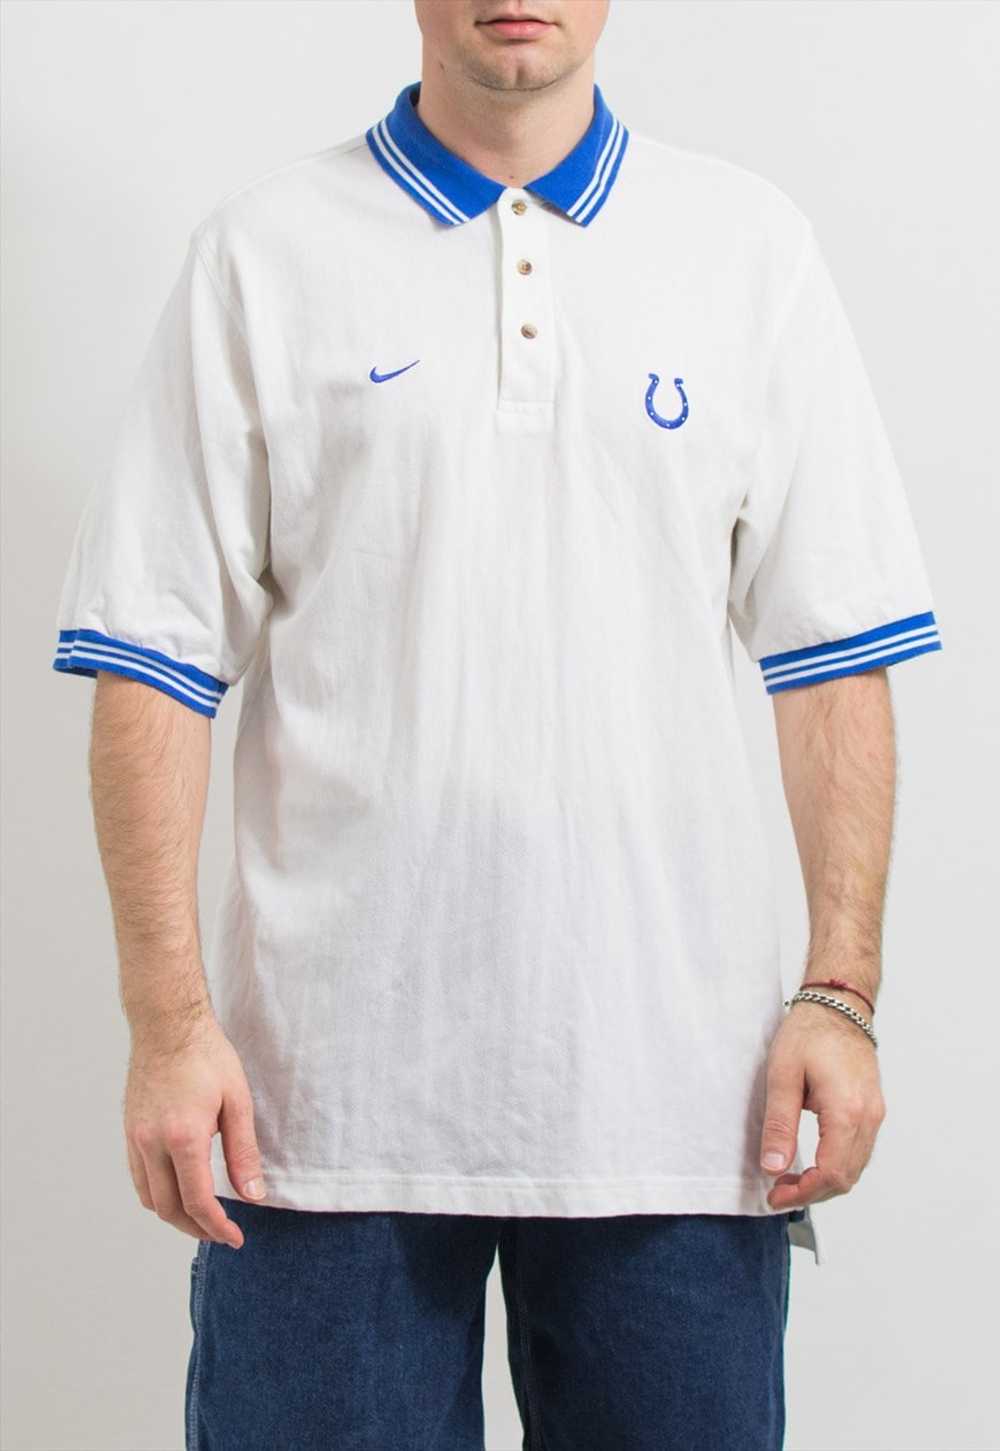 Nike 90's polo shirt Indianapolis Colts NFL top m… - image 5